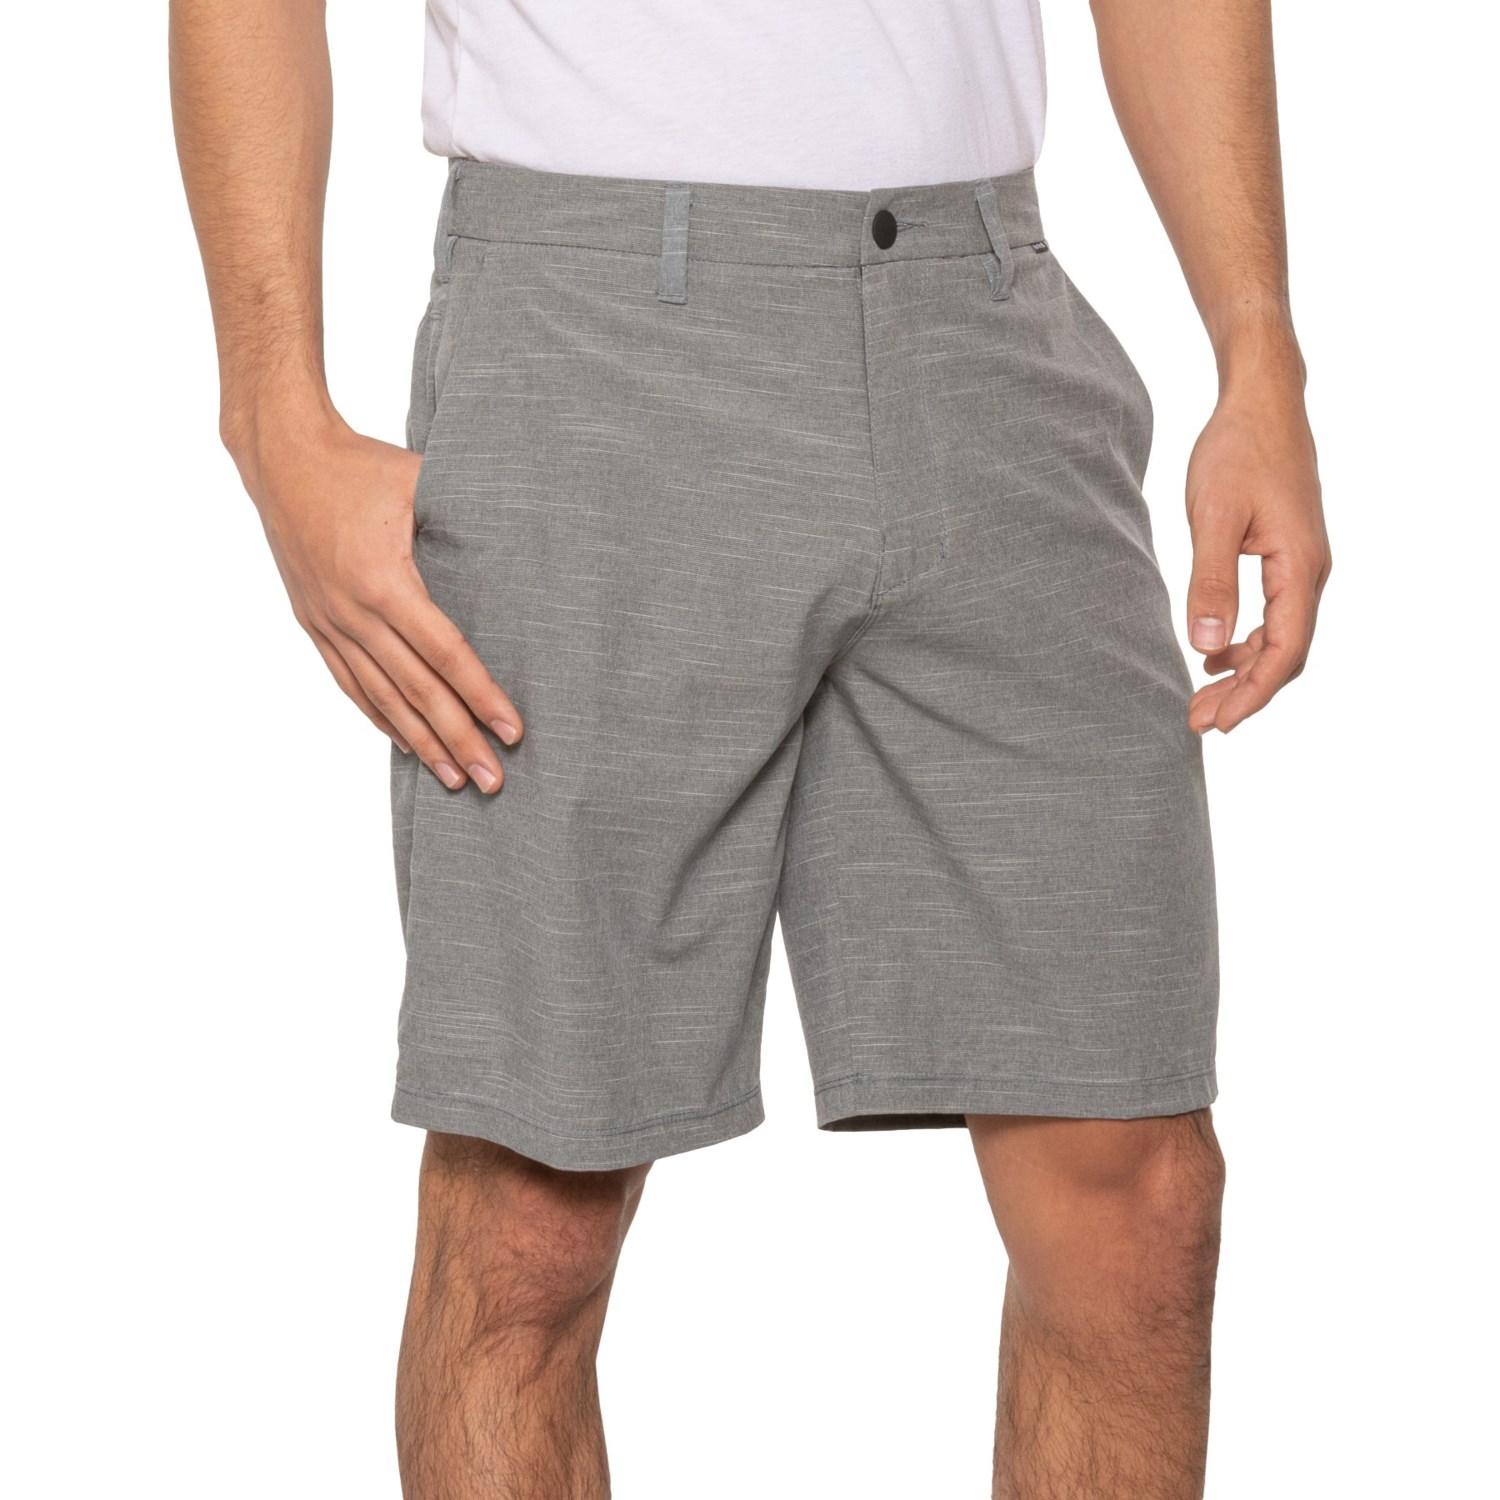 rol Dislocatie Wees Hurley Phantom Jetty Shorts (For Men) - Save 52%